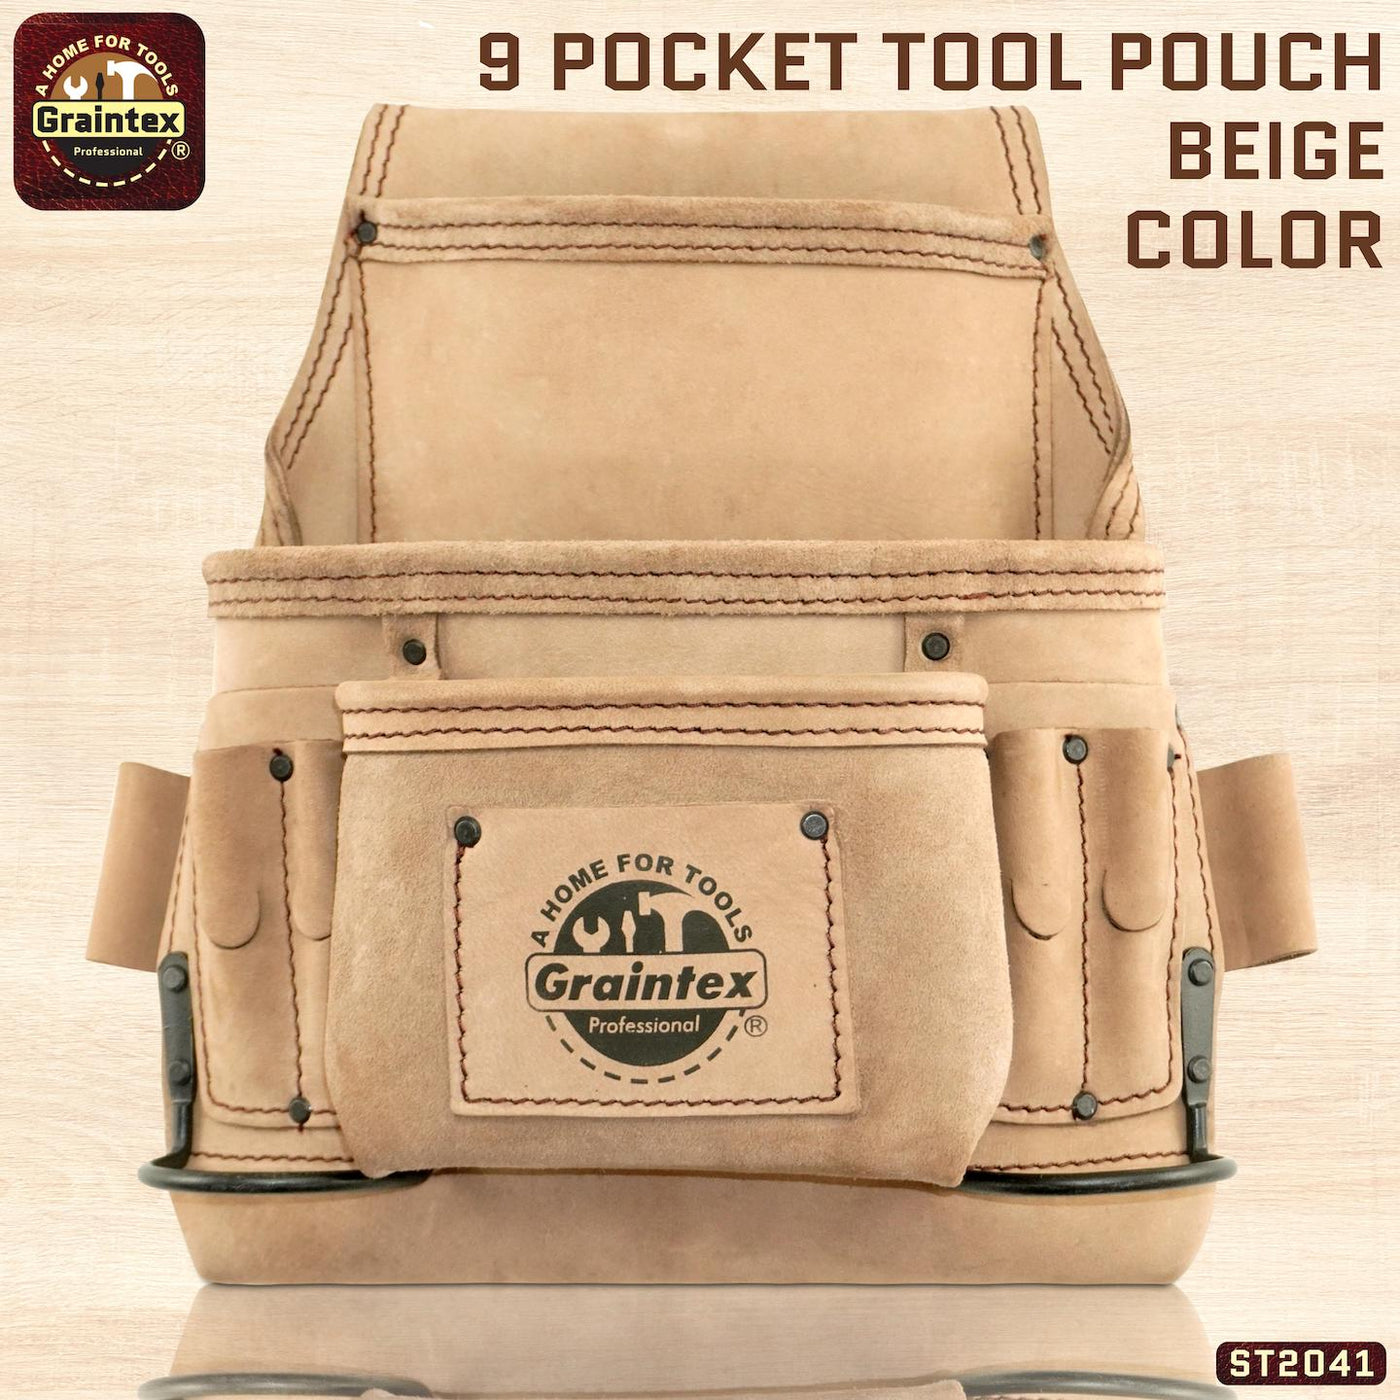 ST2041 :: 9 Pocket Nail & Tool Pouch Beige Color Top Grain Leather